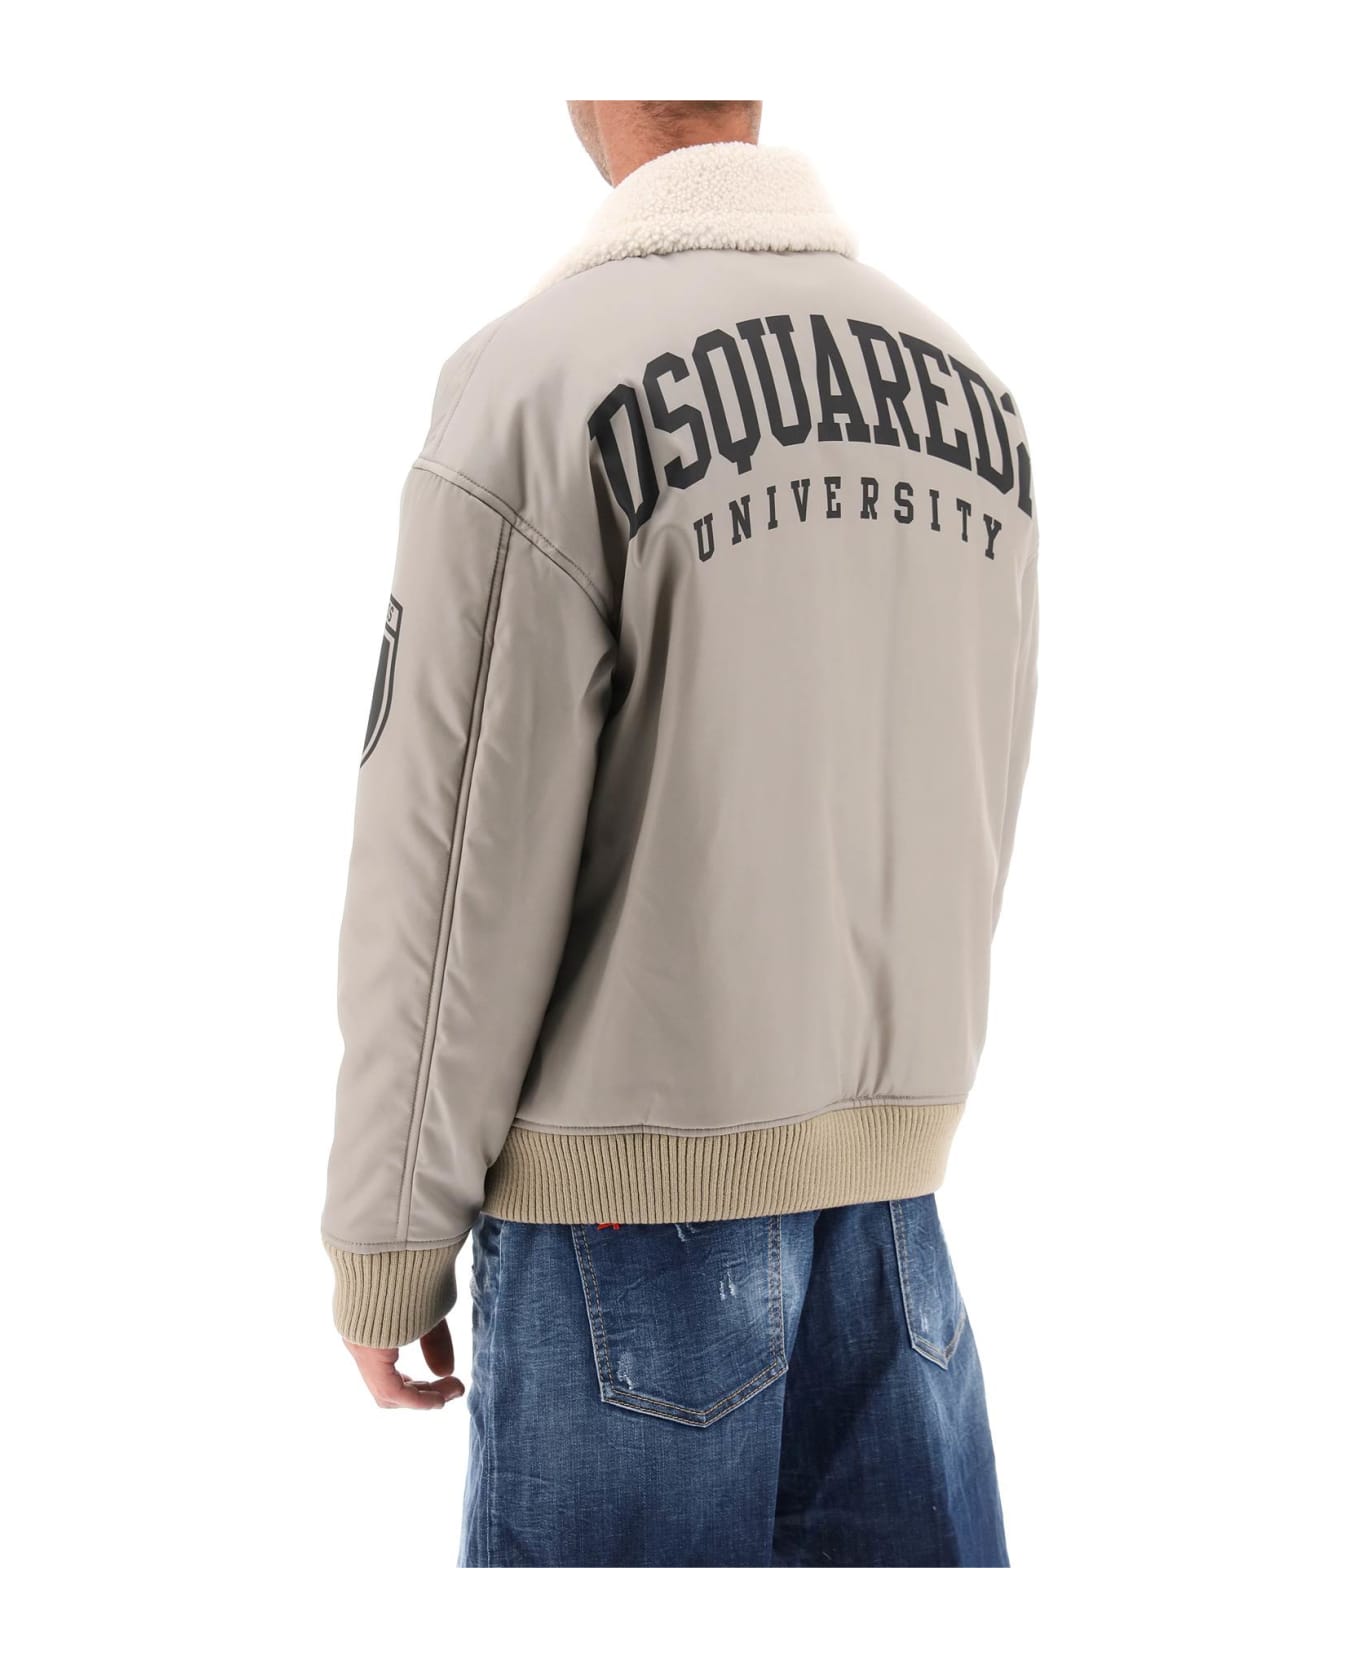 Dsquared2 Padded Bomber Jacket With Collar In Lamb Fur - STONE (Grey)